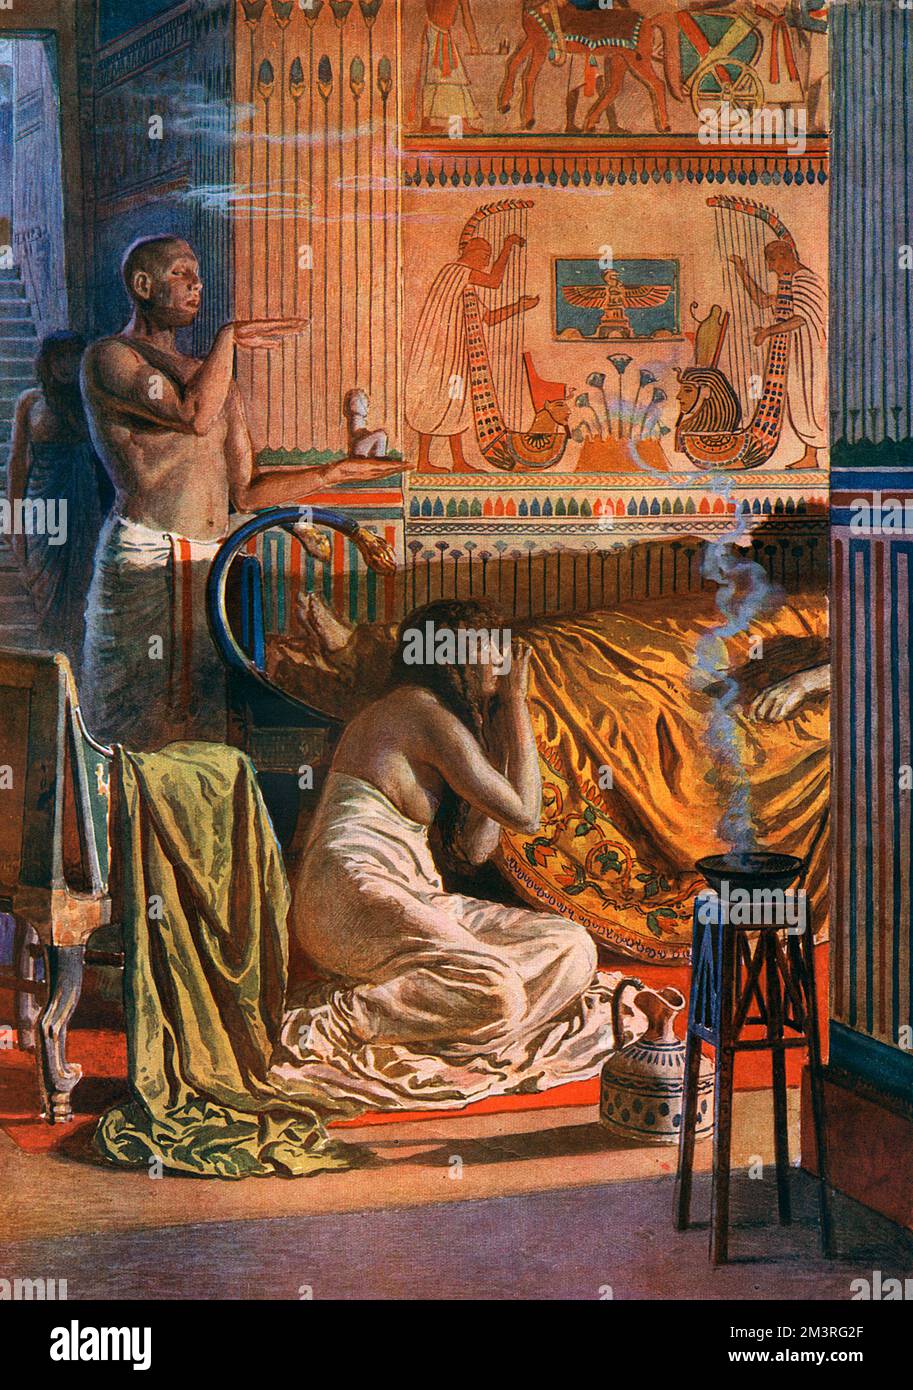 From Palace to Tomb, Episode 1: Pharaoh falls ill, the exorcist is called in.  First in a series of historical reconstructions by Fortunino Matania in The Sphere magazine's Egypt number (following the discovery of Tutankhamen's tomb), tracing the journey of a Pharaoh from palace to tomb. Depicted here is the visit of an exorcist summoned by the wife of a gravely ill pharaoh.  He brings some little figures possessing sufficient power to drive away the evil spirit which is possessing the body of the sick ruler  He utters a powerful incantation and promises improvement in the patient's condition. Stock Photo